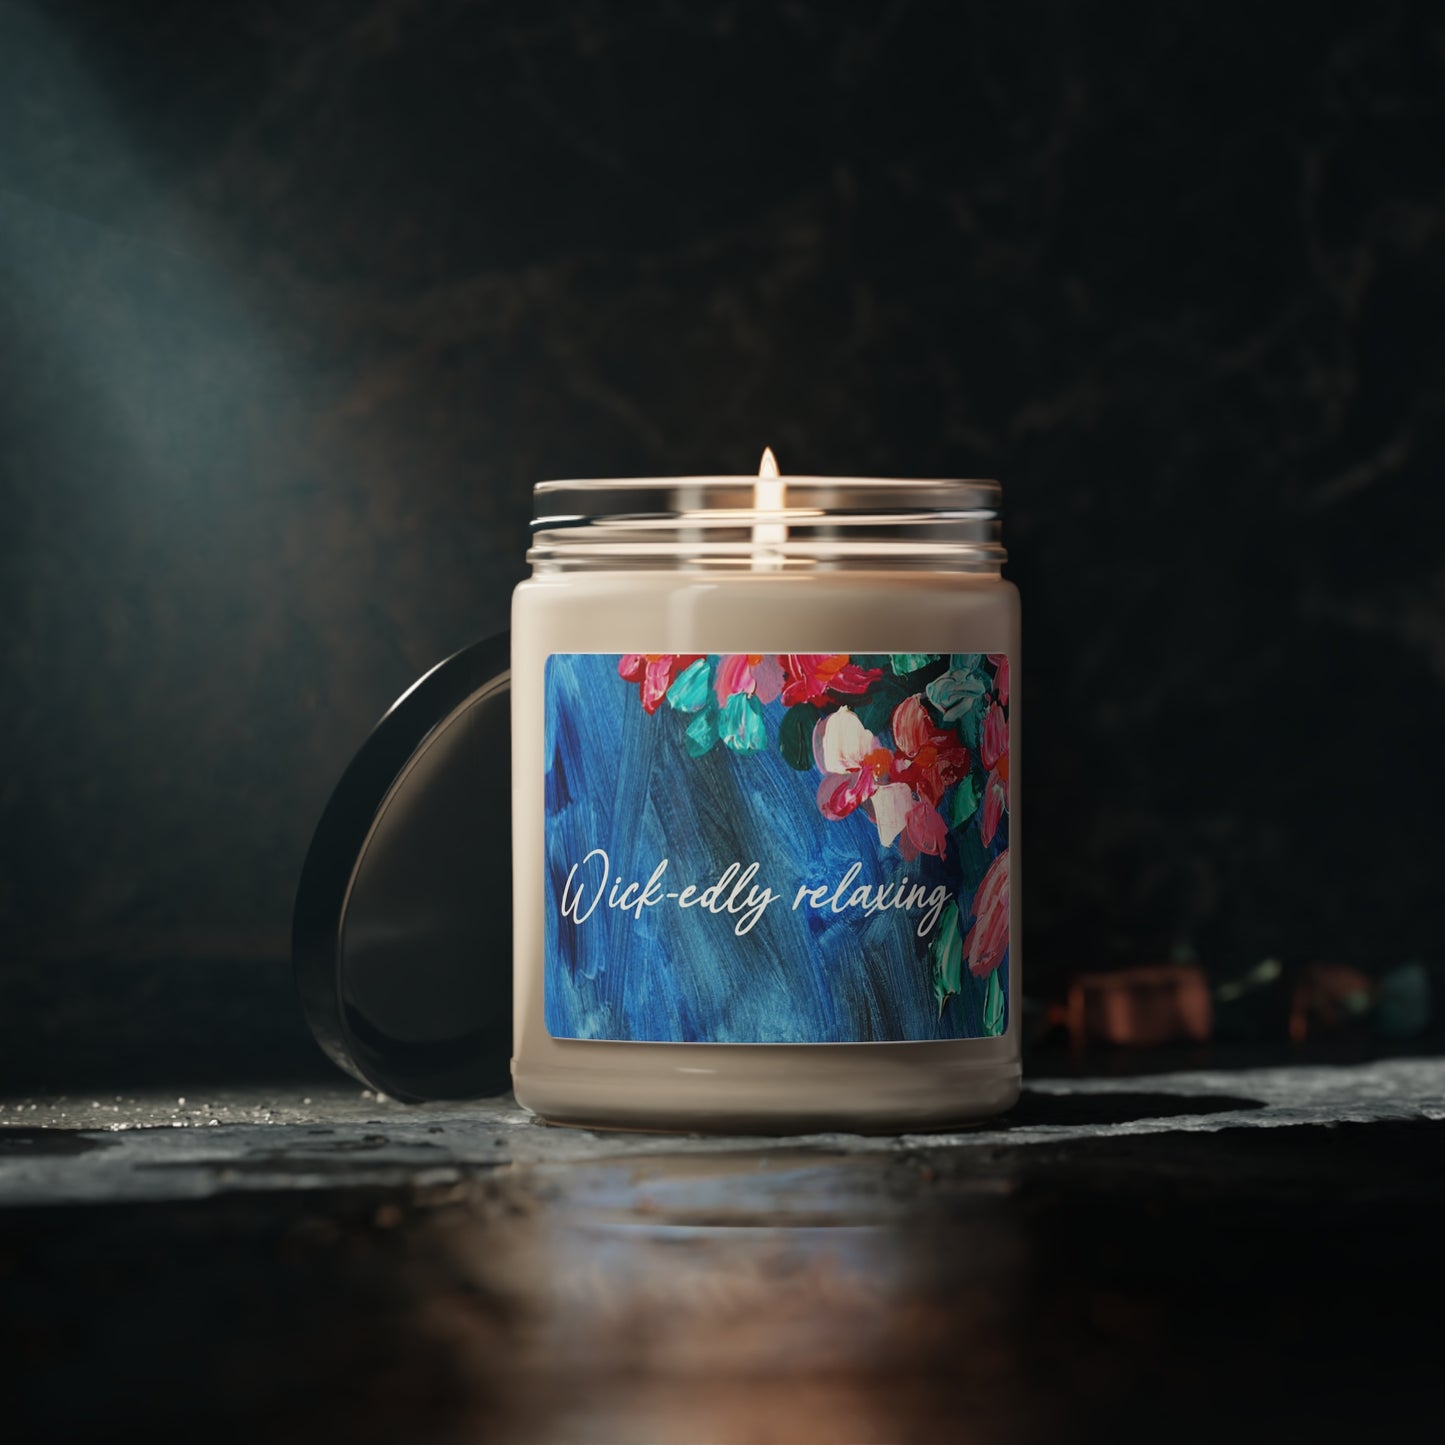 Scented Soy Candle "Wick-edly relaxing"